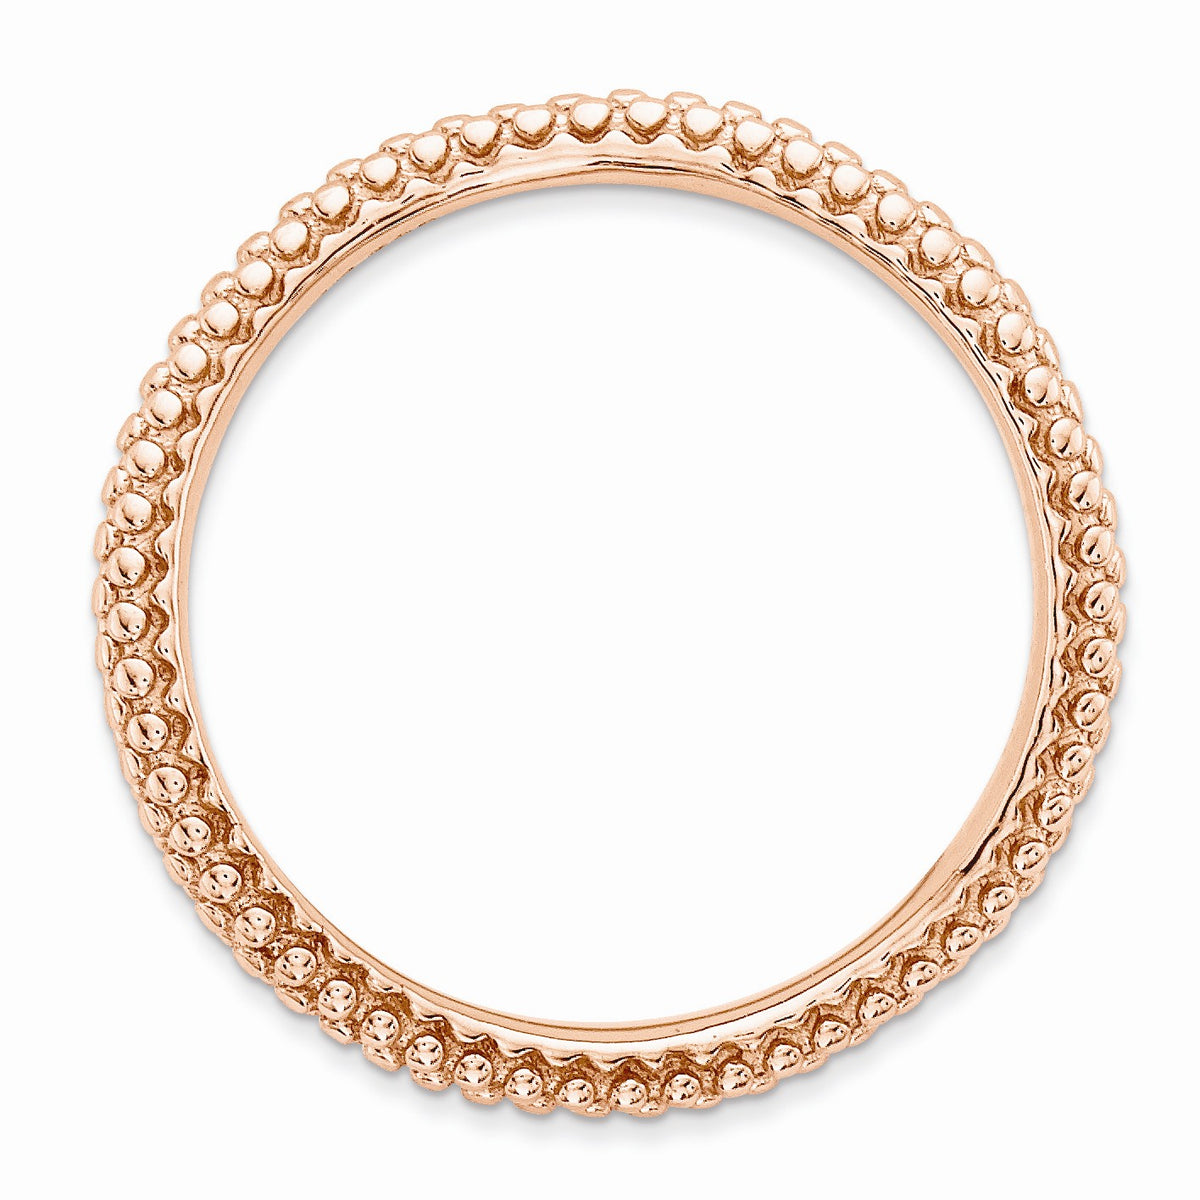 Alternate view of the 2.25mm Stackable 14K Rose Gold Plated Silver Curved Band by The Black Bow Jewelry Co.